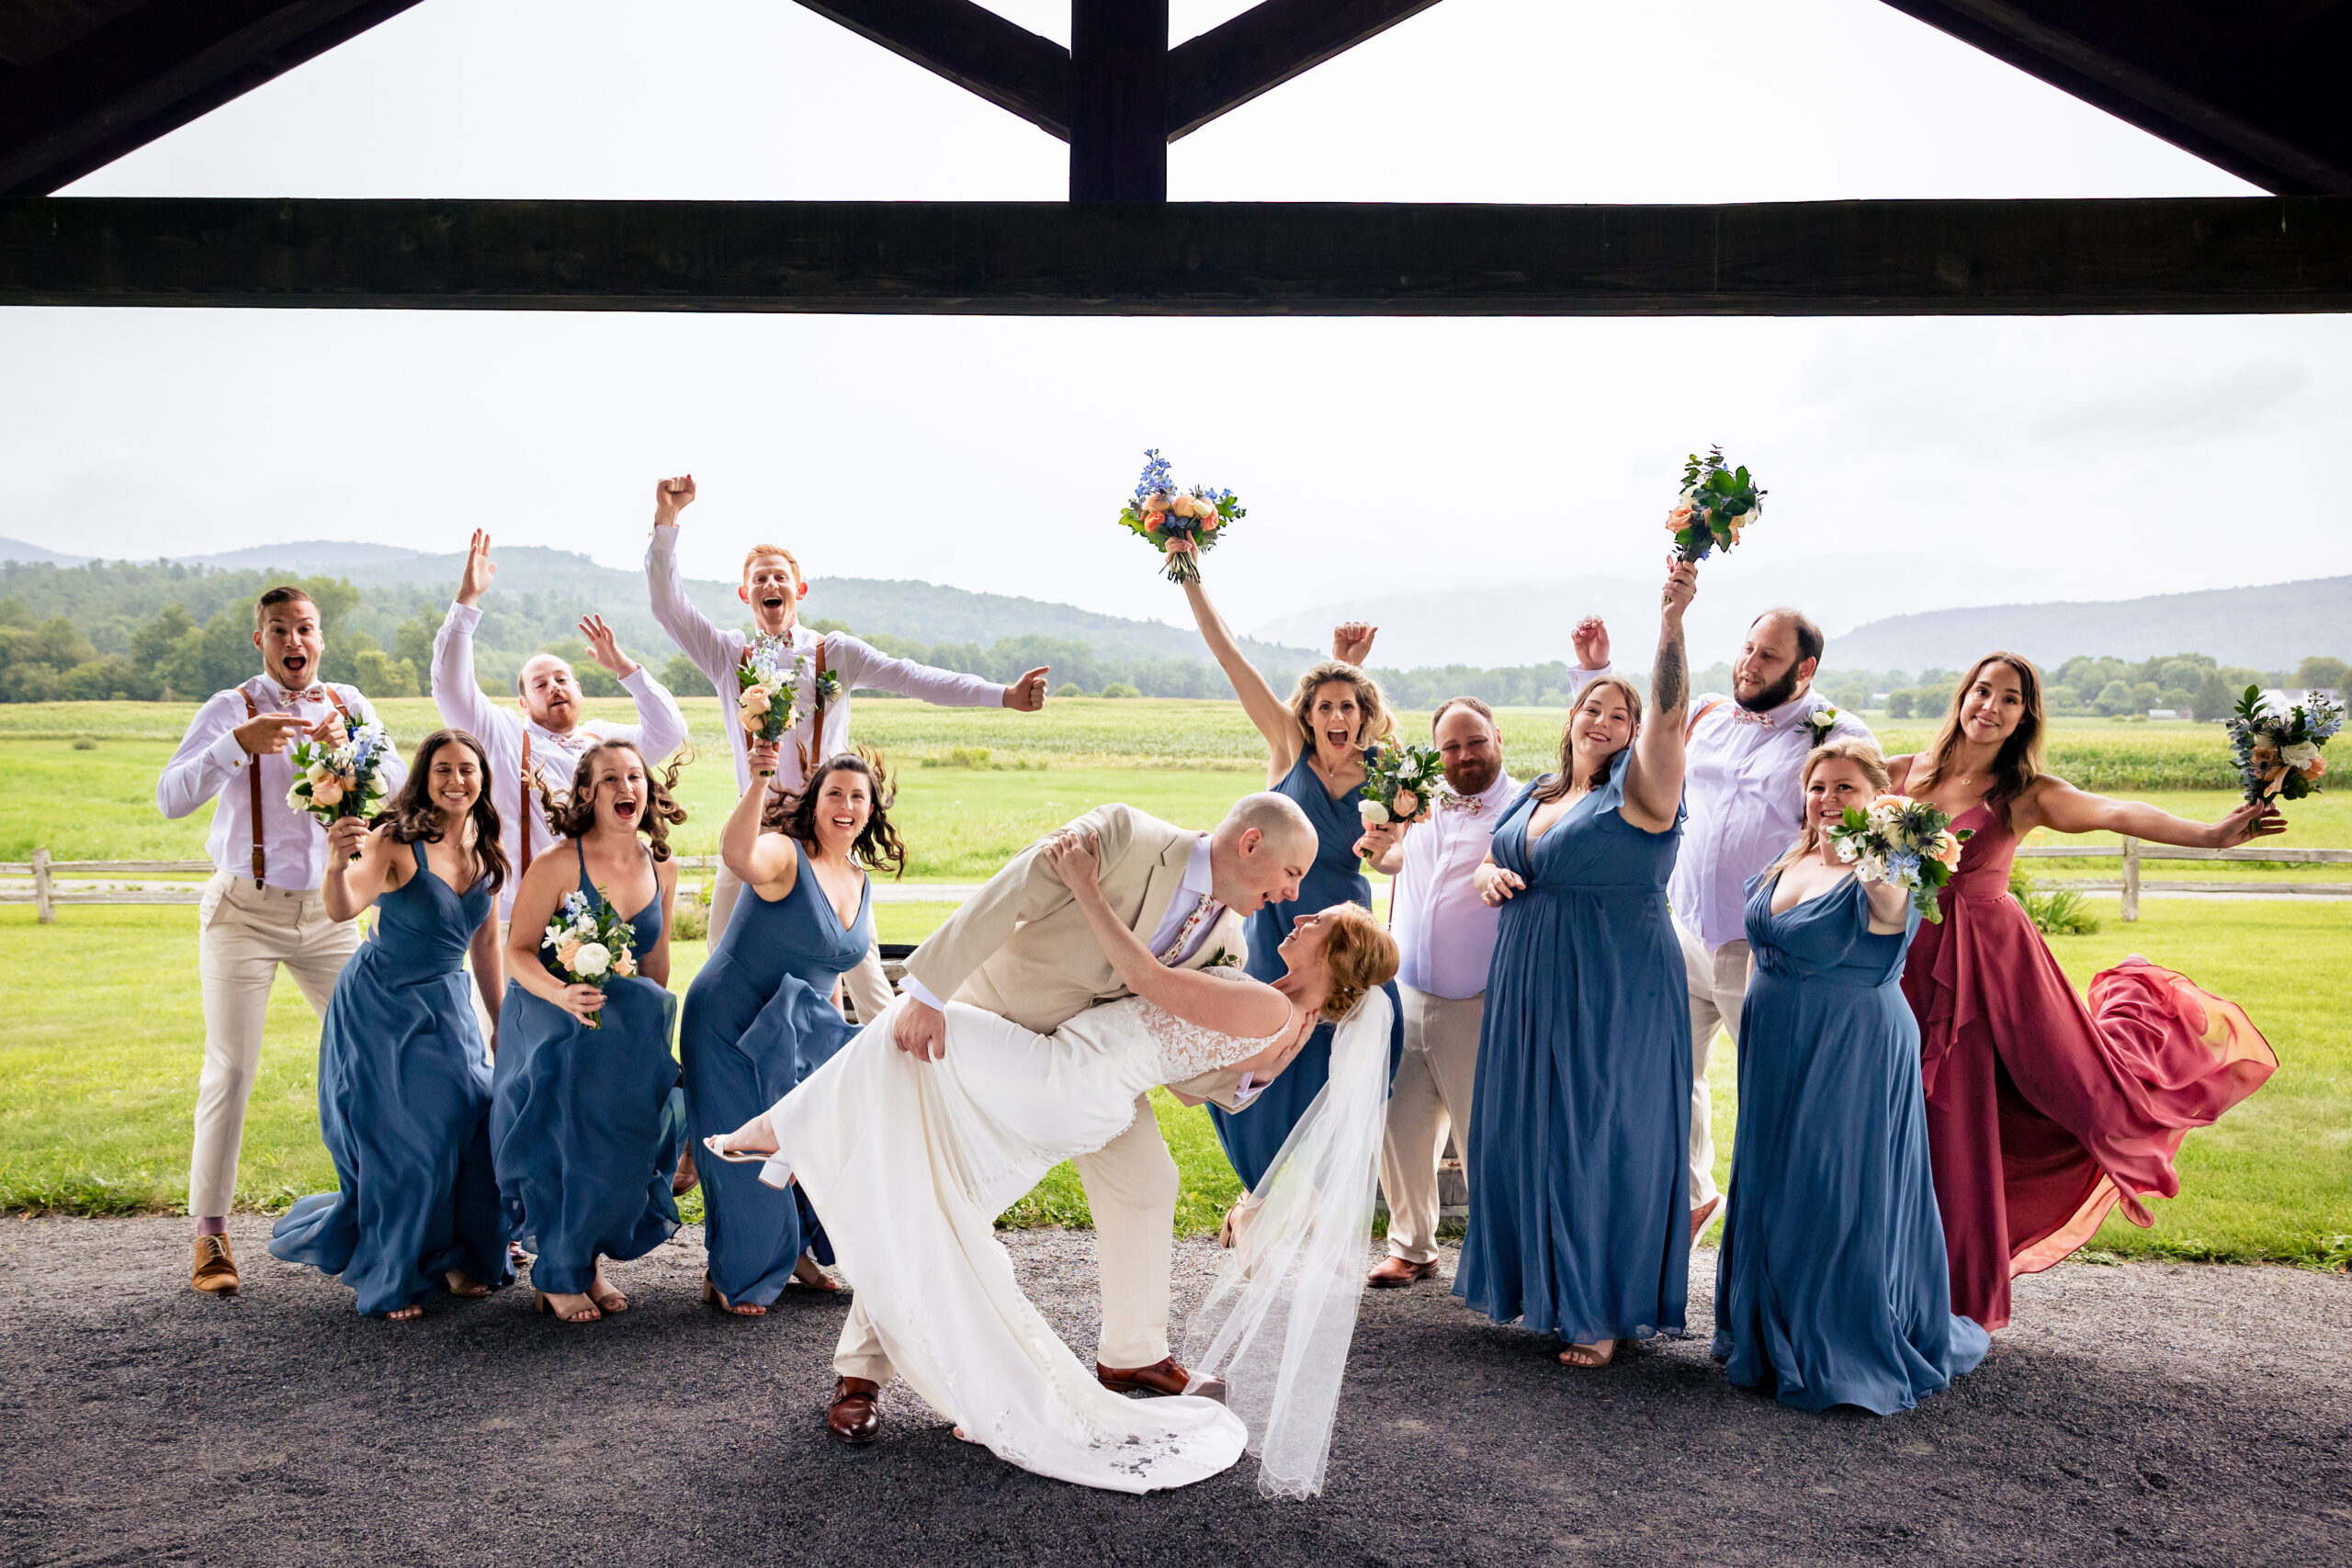 Husband dipping his wife at their summer wedding Venue in Vermont while the bridesmaids celebrate behind them in bright blue dresses.